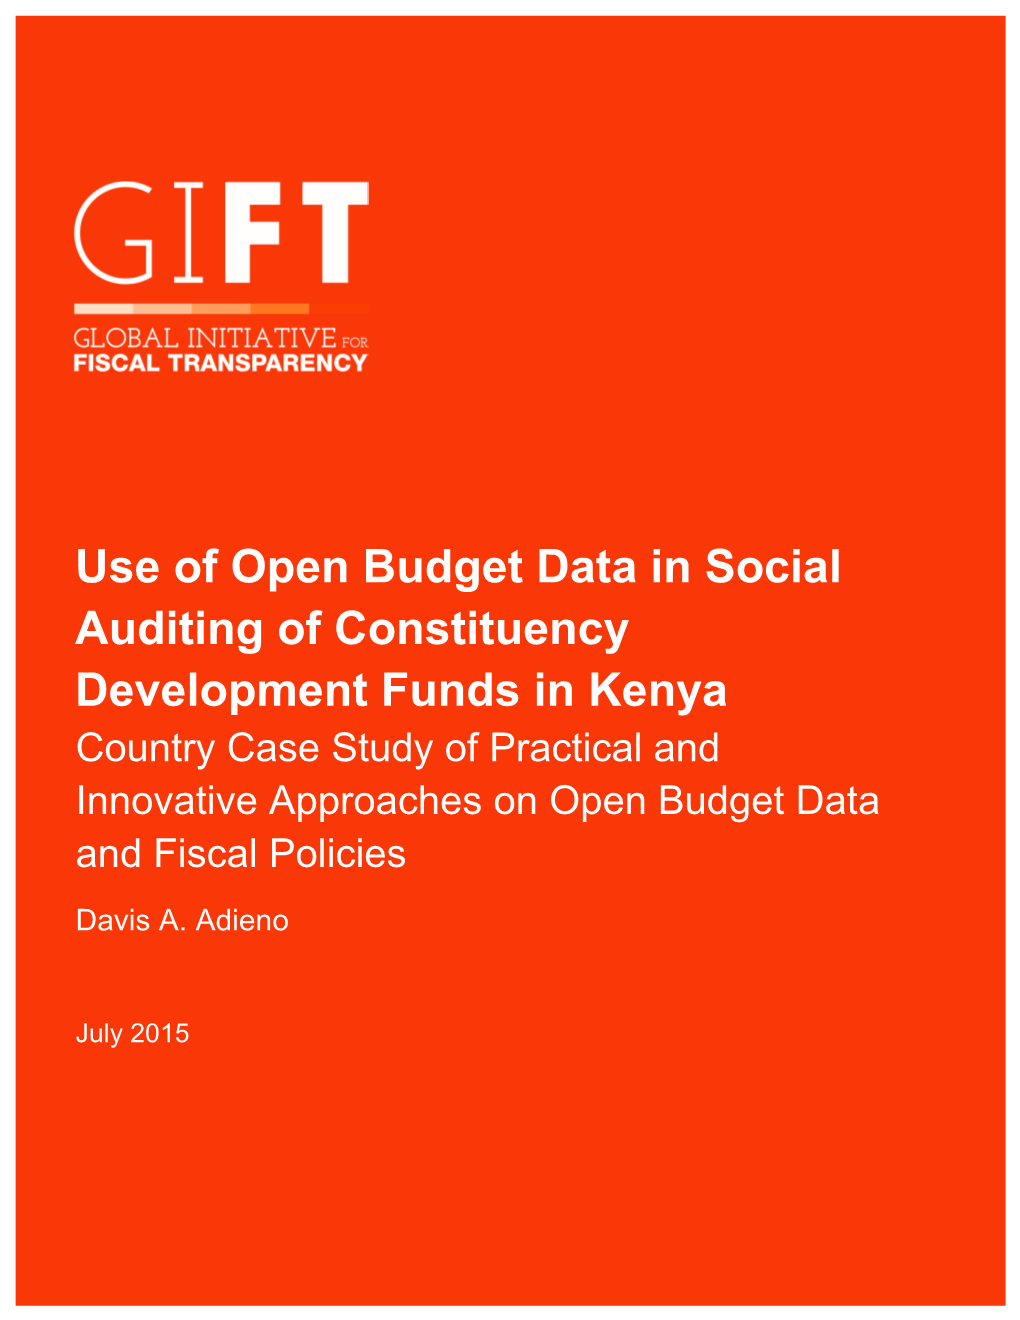 Use of Open Budget Data in Social Auditing of Constituency